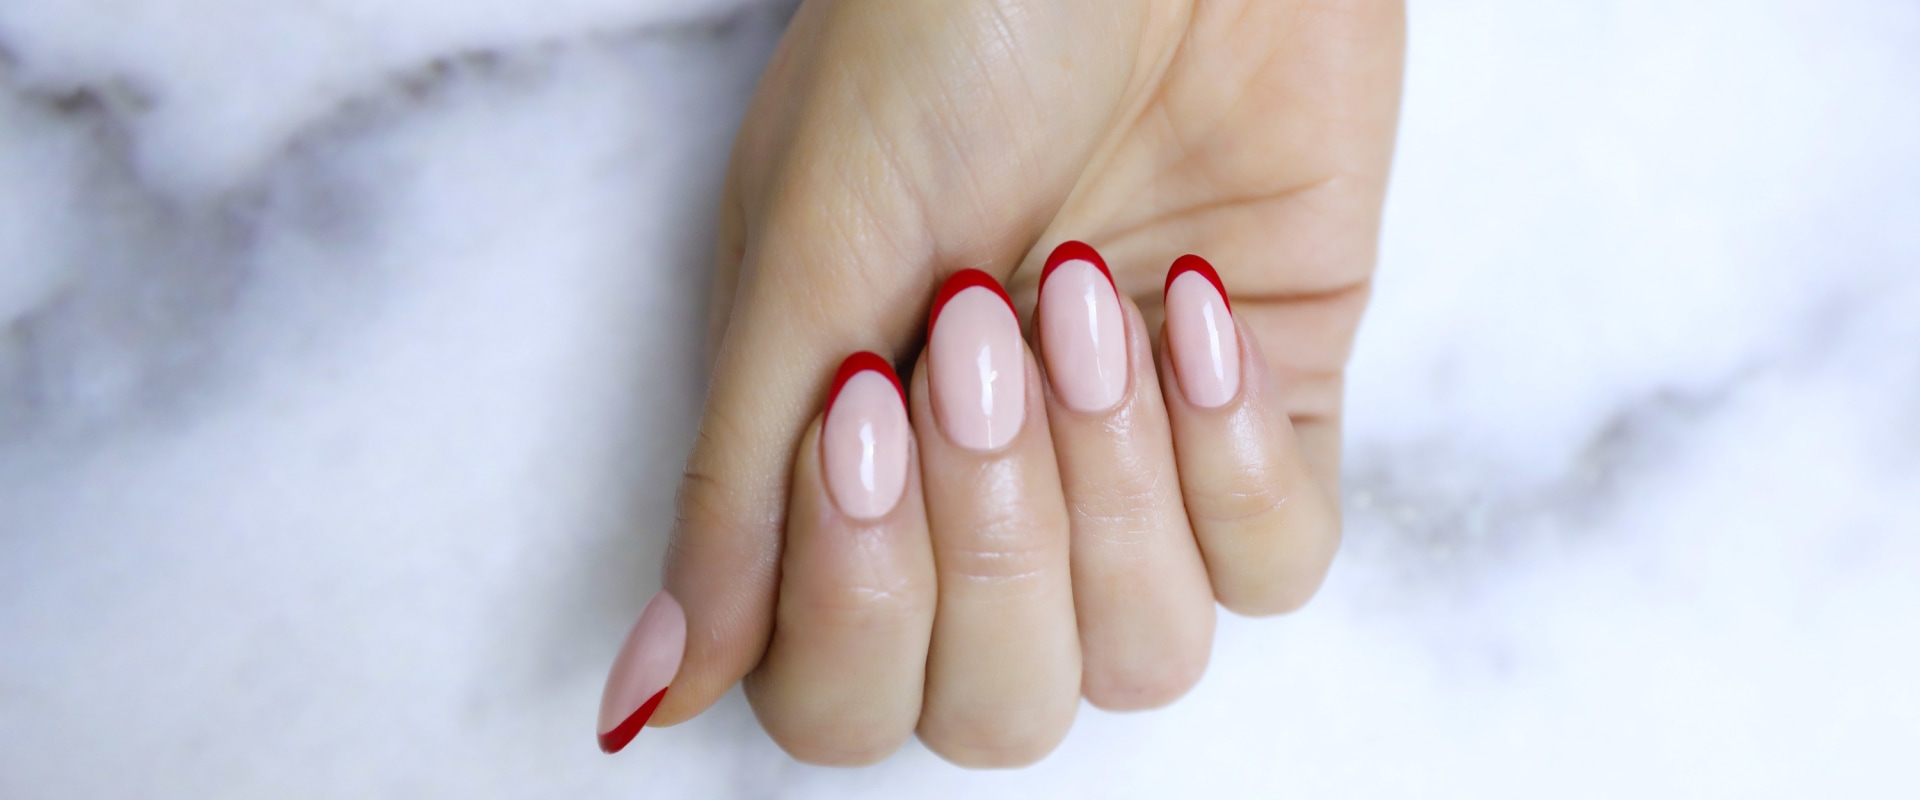 Everything You Need to Know About Nail Treatments at Beauty Salons in London